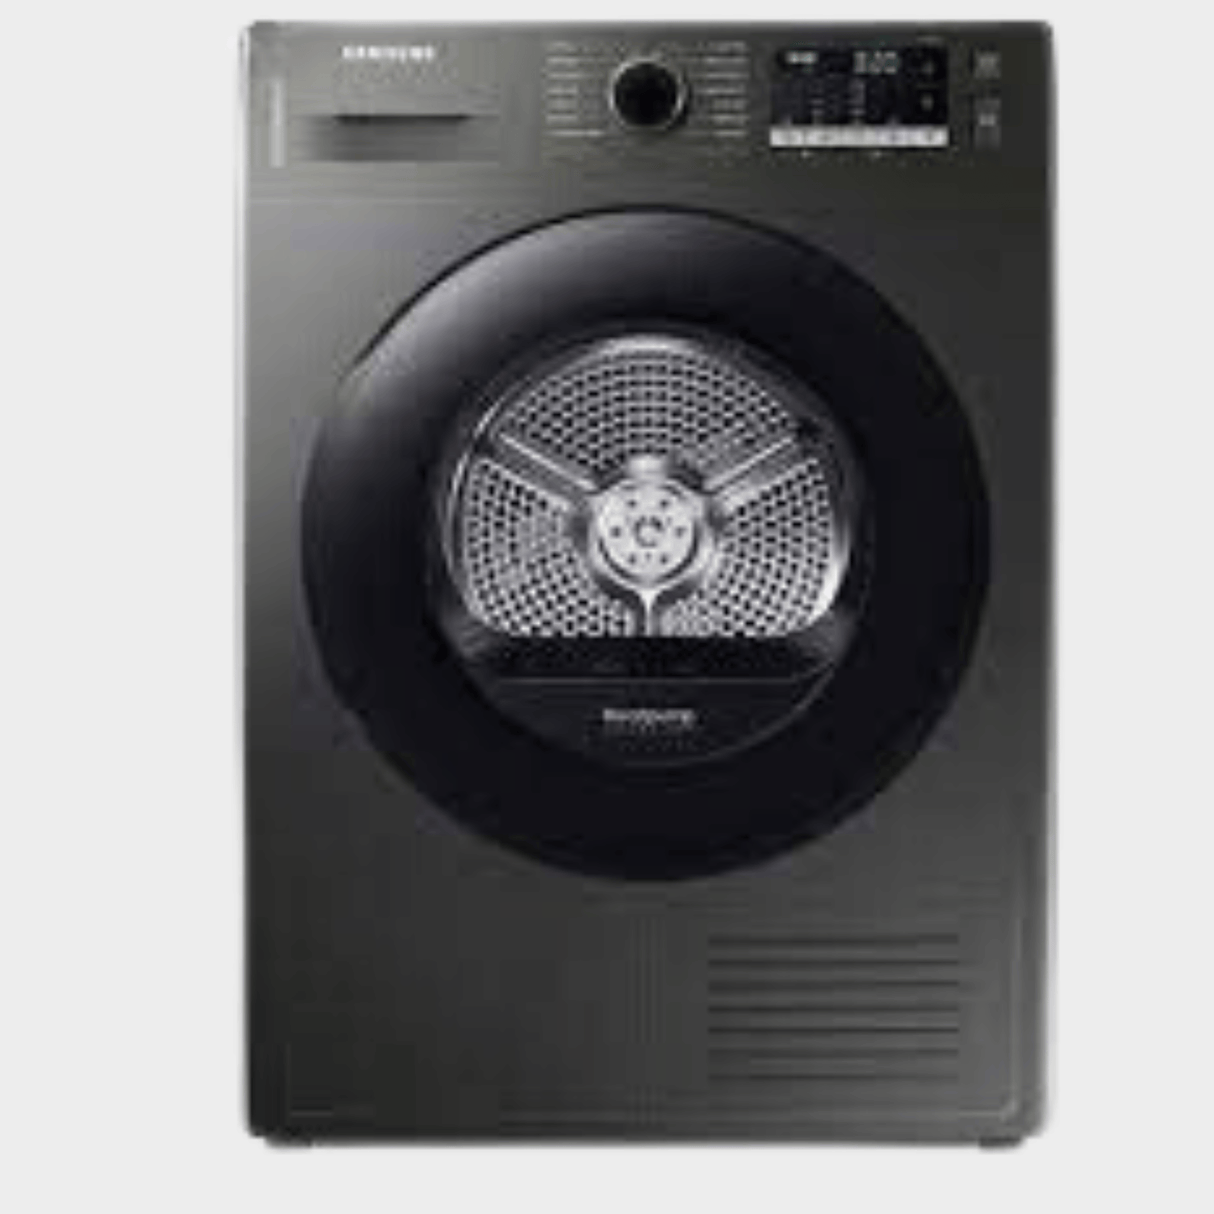 Samsung 21kg Front Load Washer Dryer, Ecobubble, Smart AI, WD21 T6300GV - Inox